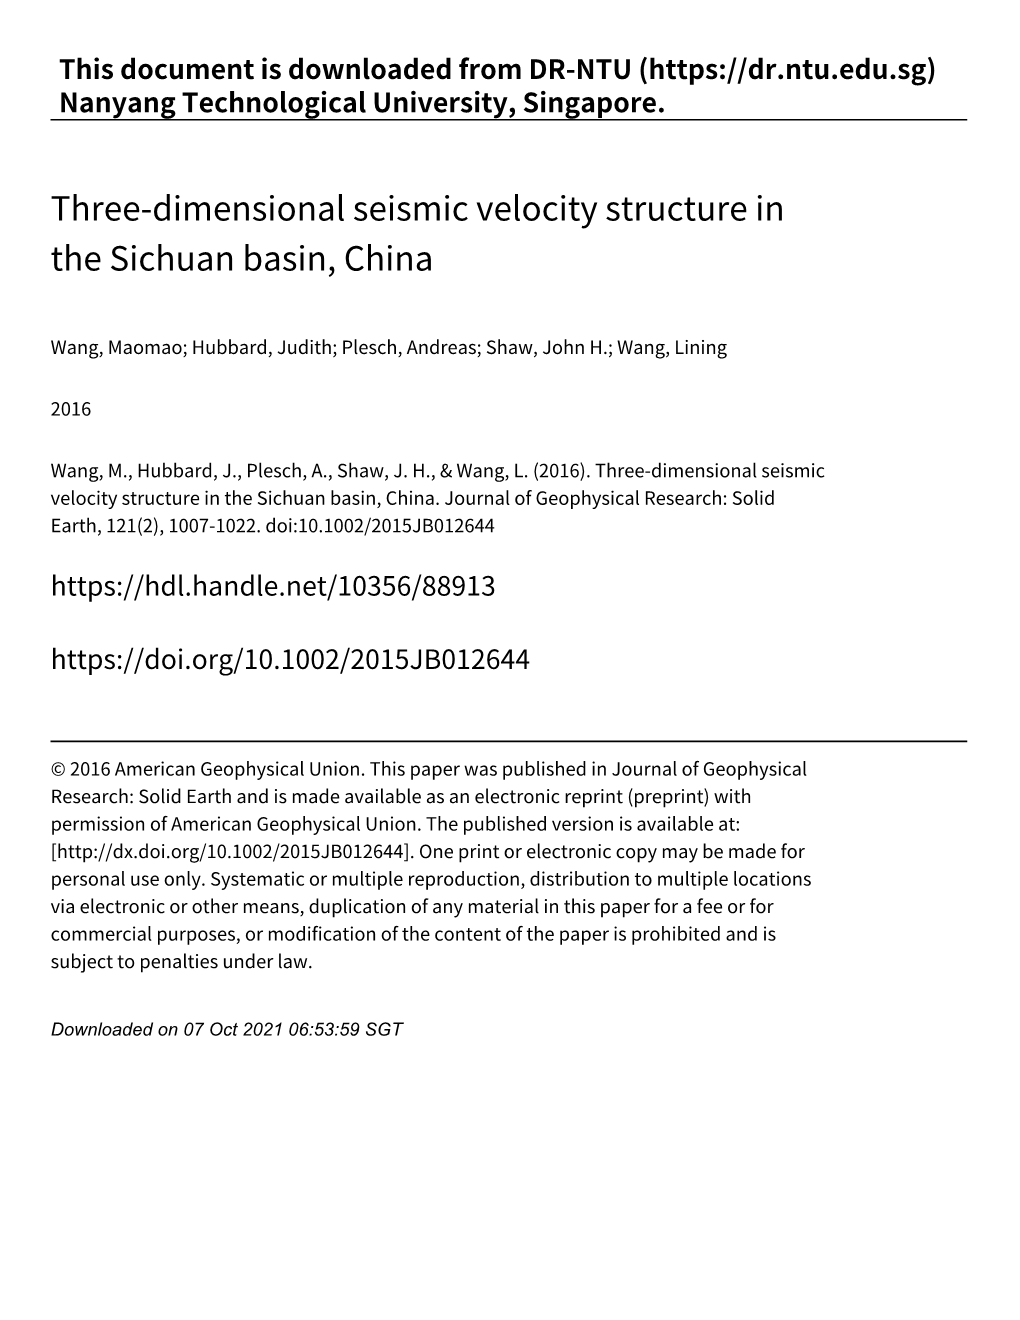 Three‑Dimensional Seismic Velocity Structure in the Sichuan Basin, China